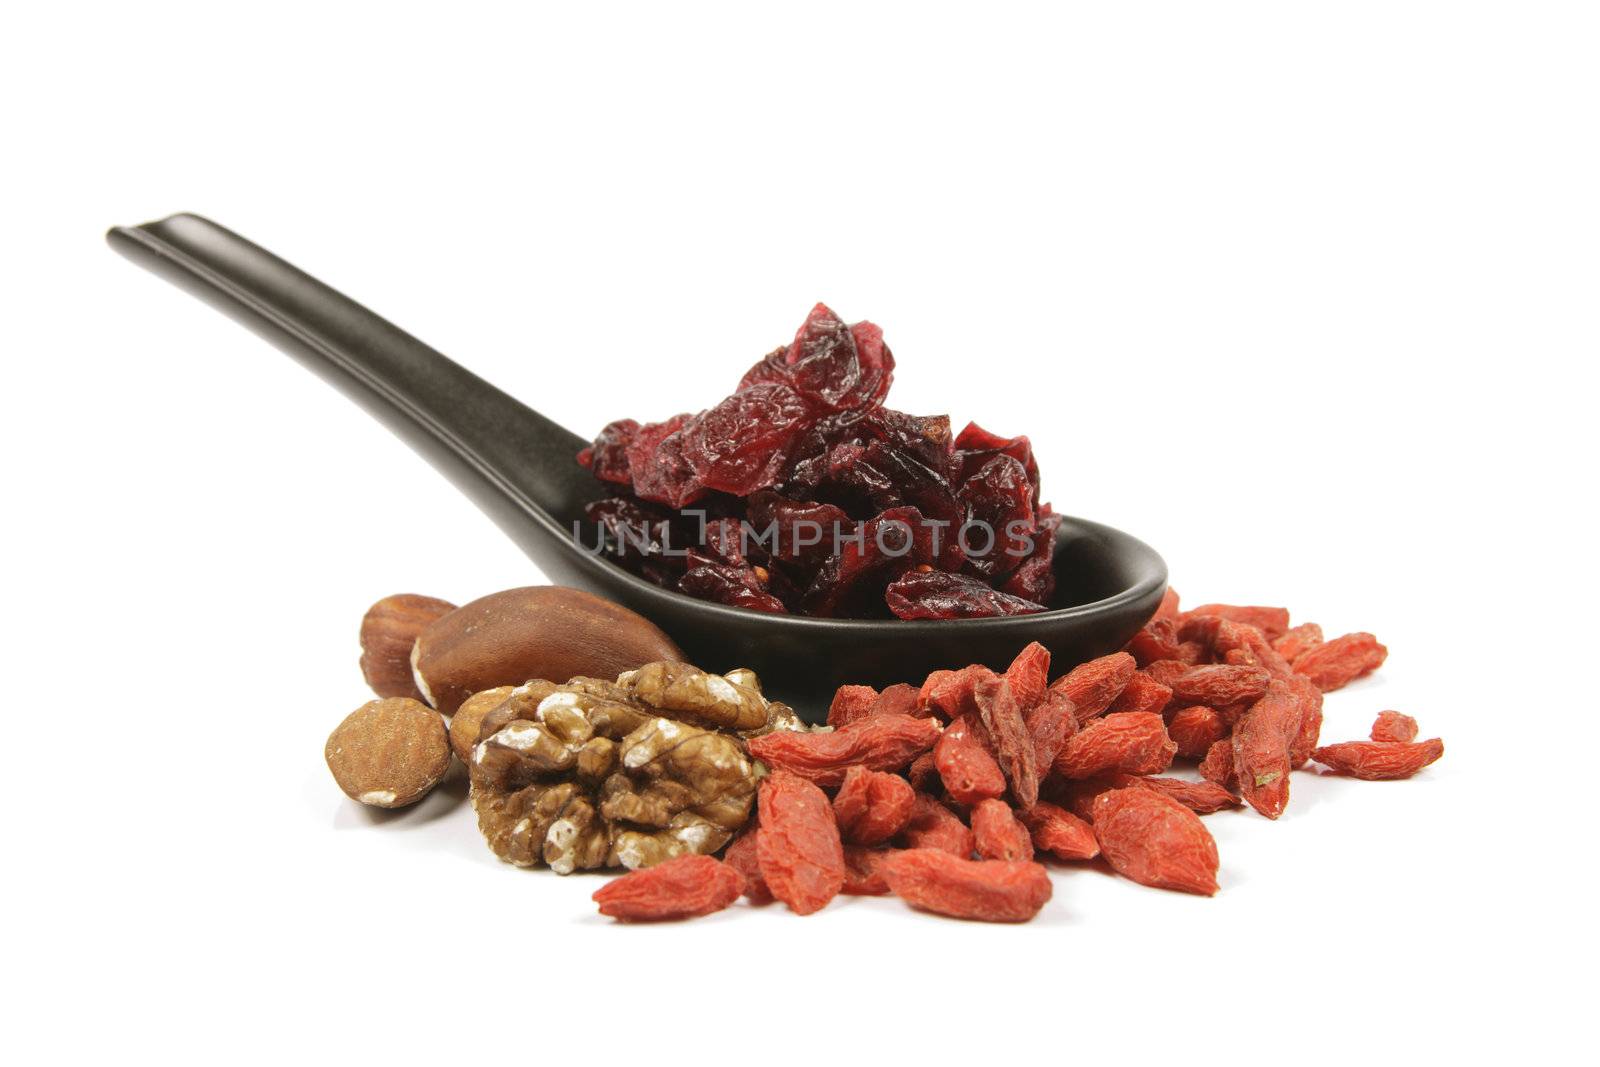 Red ripe dried cranberries on a small black spoon with mixed nuts and goji berries on a reflective white background